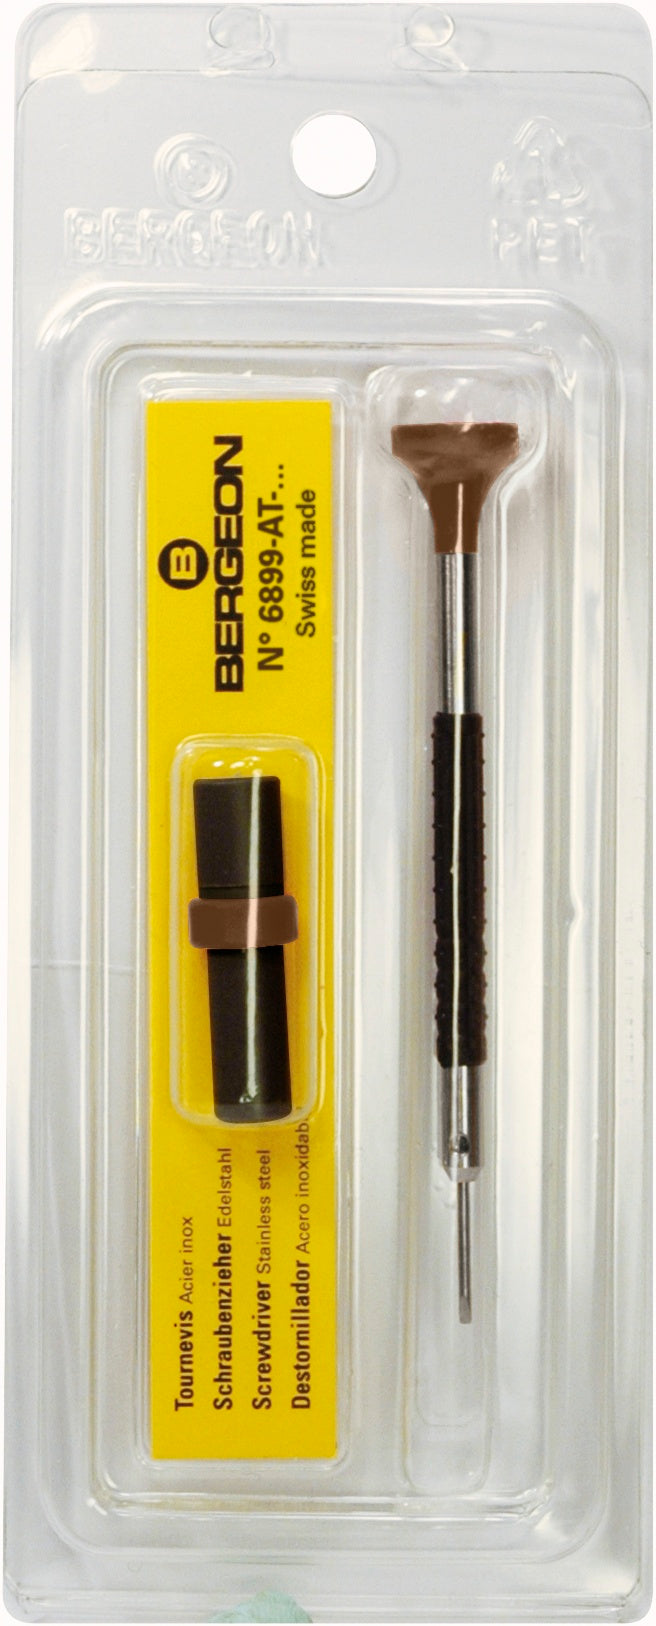 Bergeon 3.00 mm Screwdriver with Spare Blades 6899-AT-300, Ergonomic